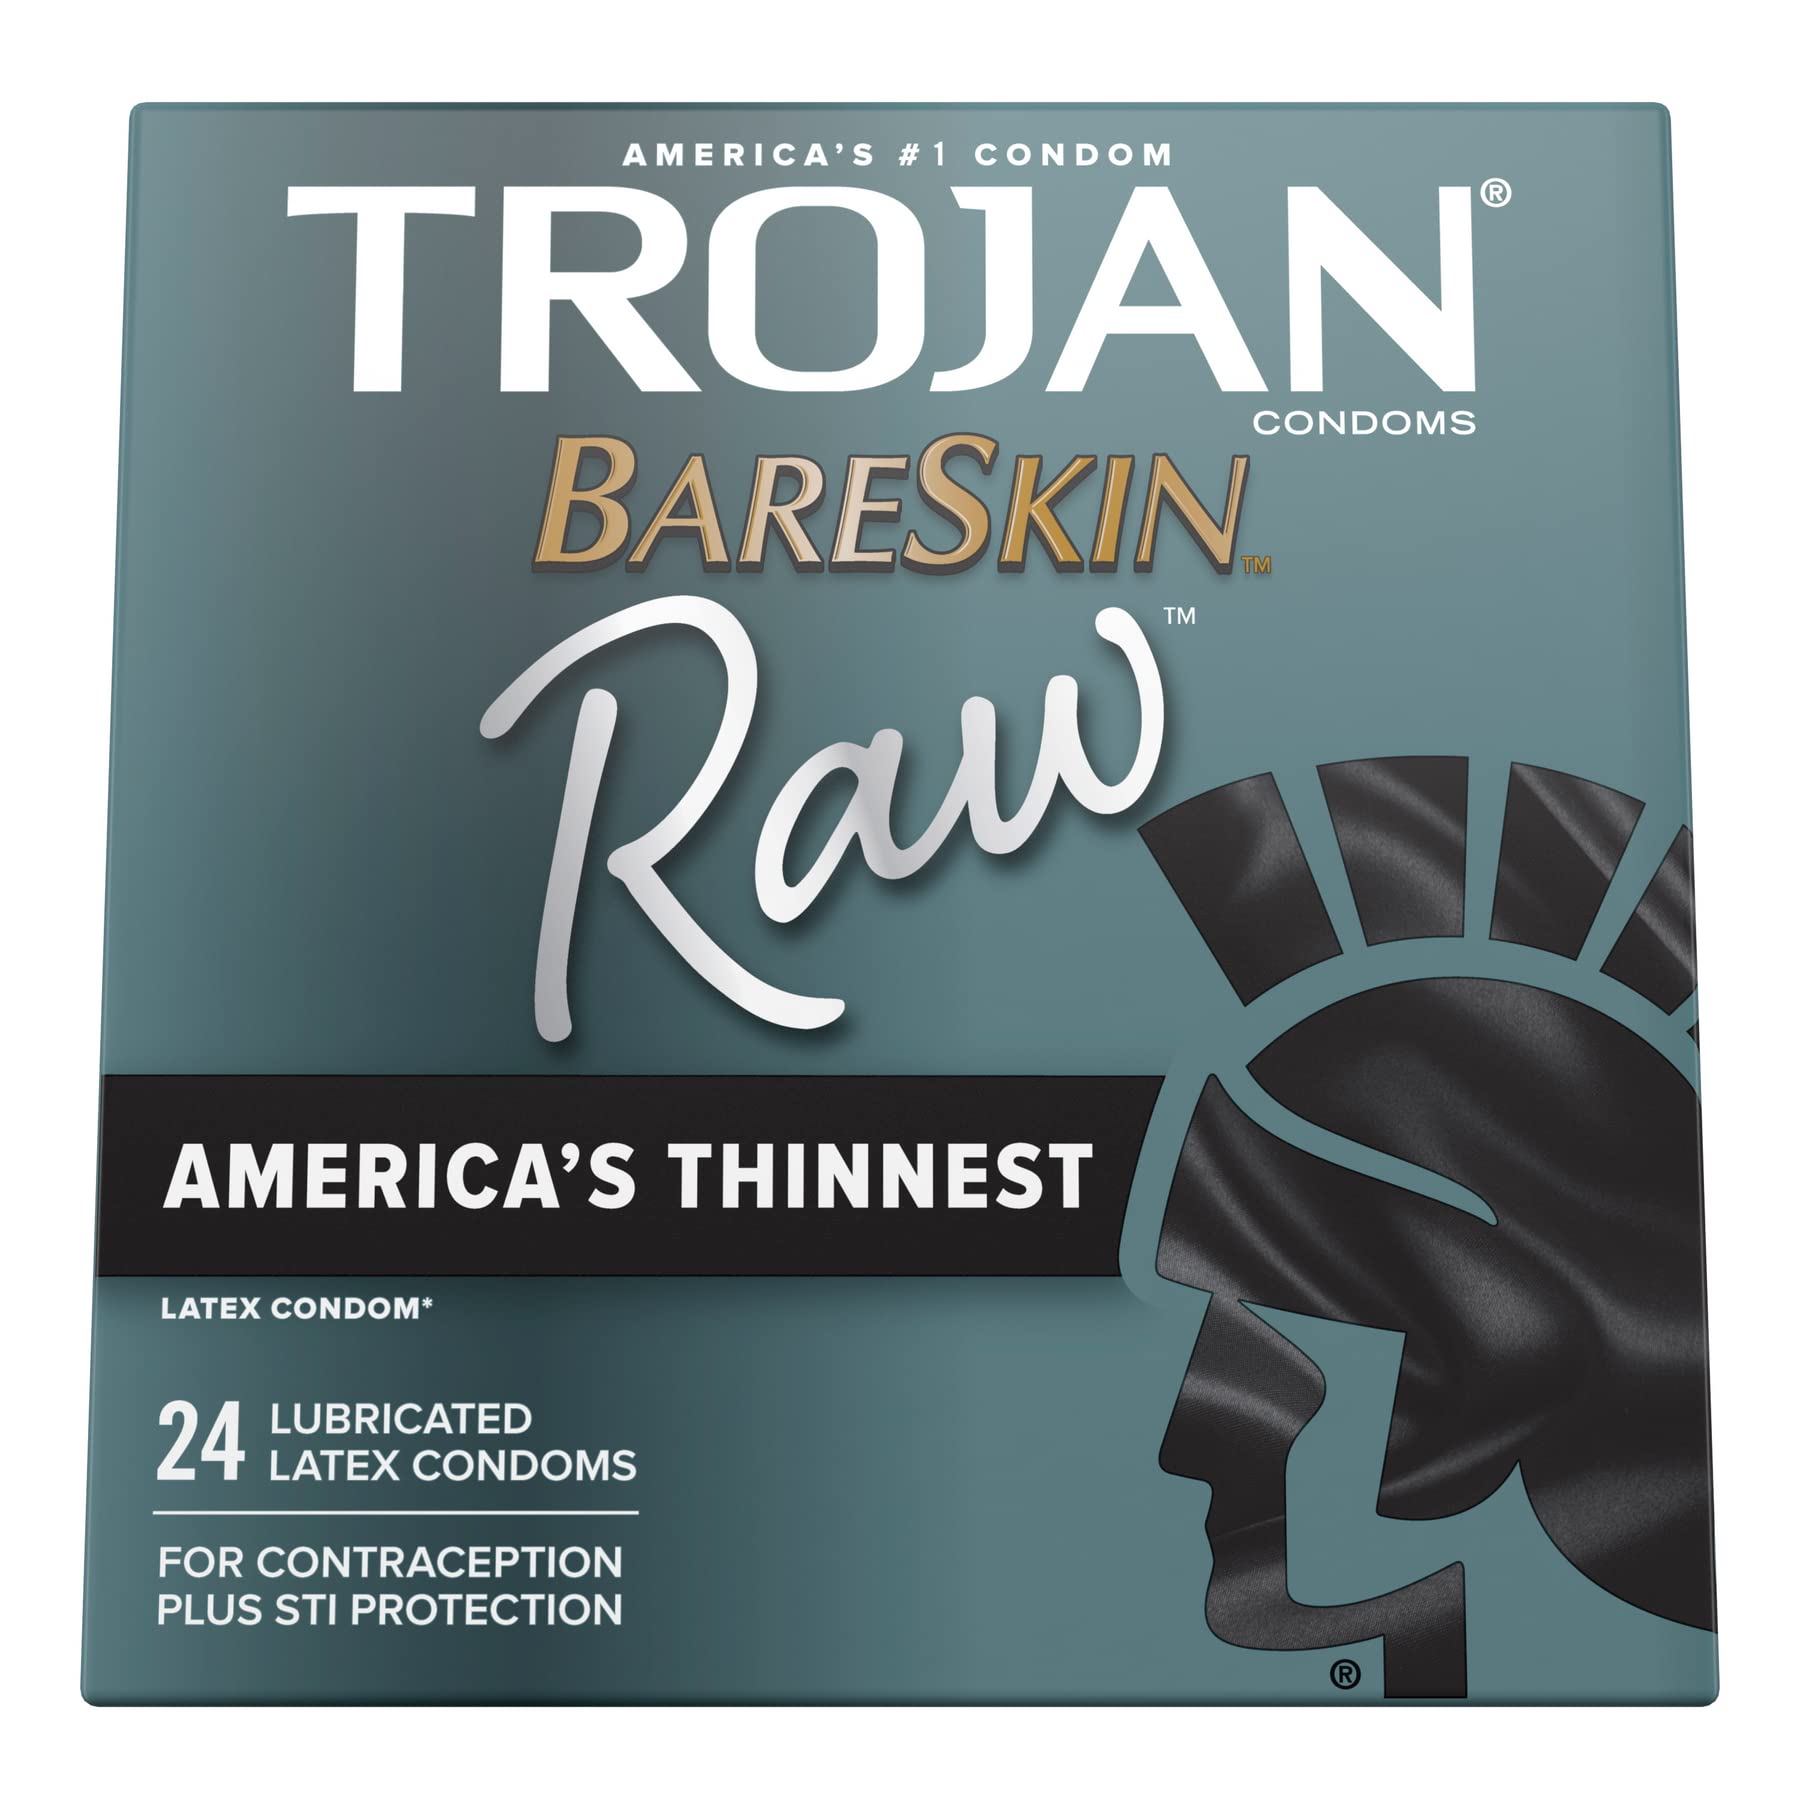 TROJAN BareSkin Raw Thin Condoms, Lubricated Condoms for Men, America’s Number One Condom Brand, 24 Count Pack